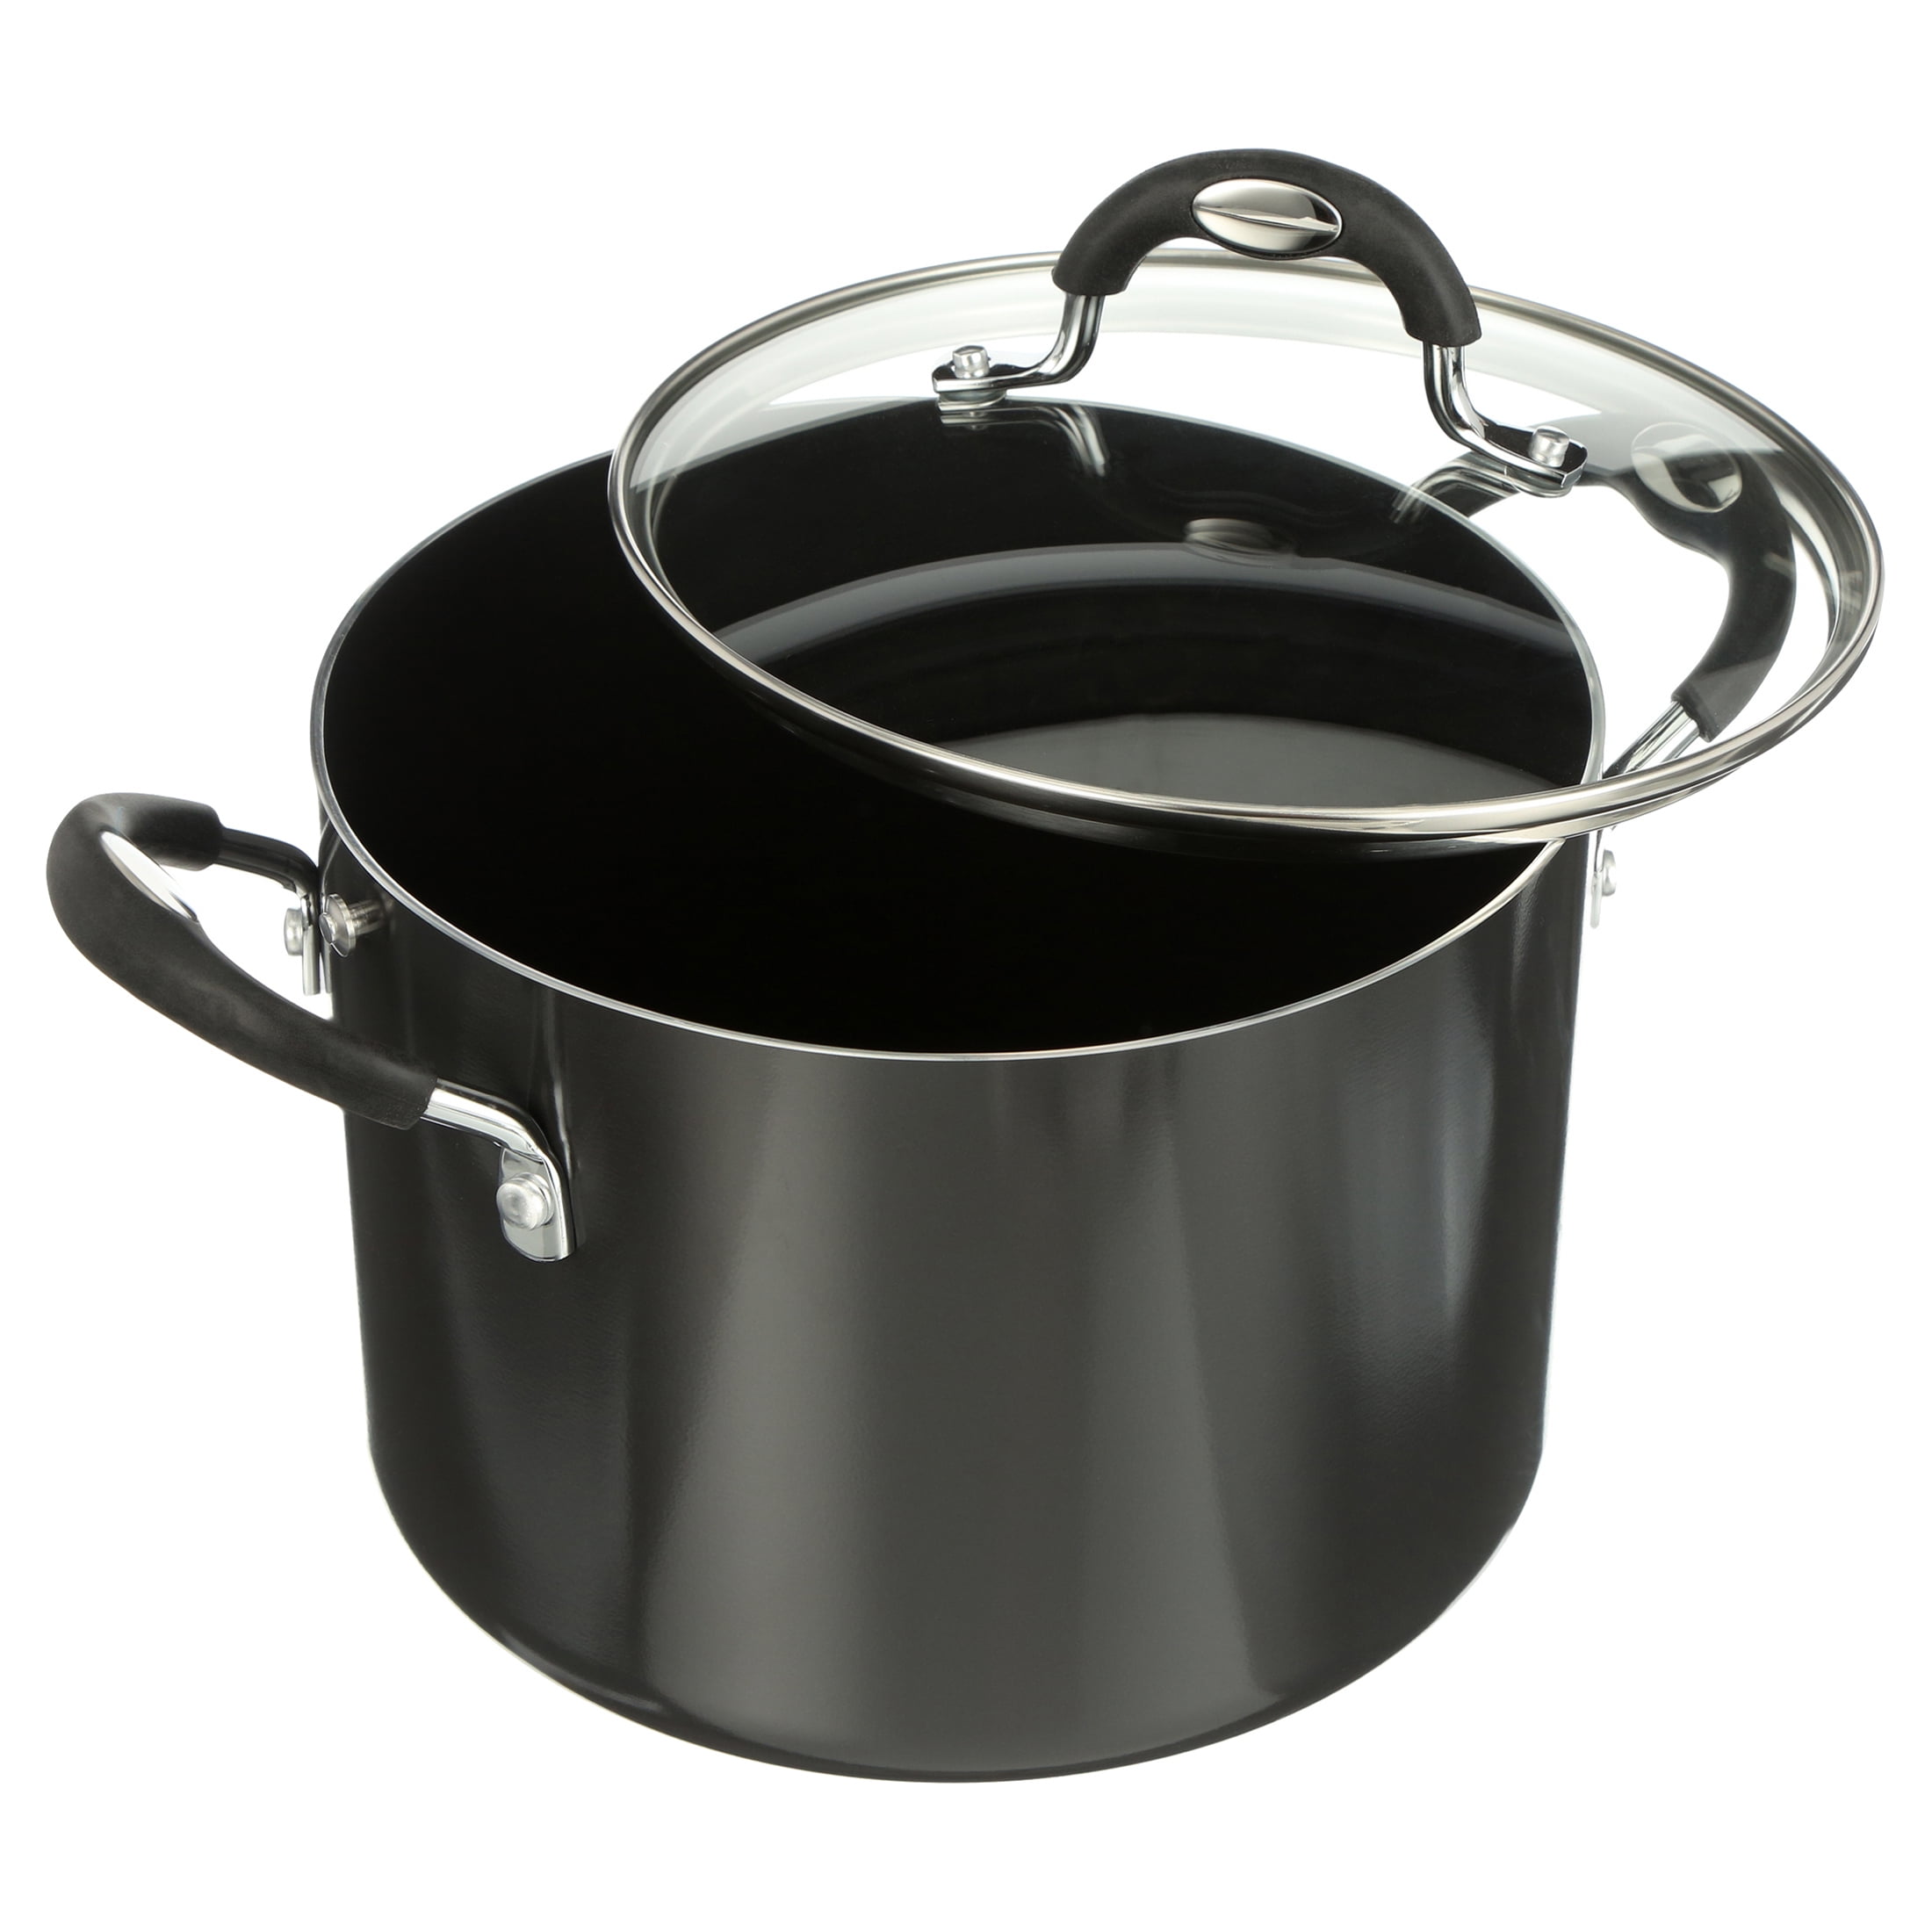 Tramontina Lock-N-Drain Stainless Steel 6 Quart Covered Stock Pot 3 Count